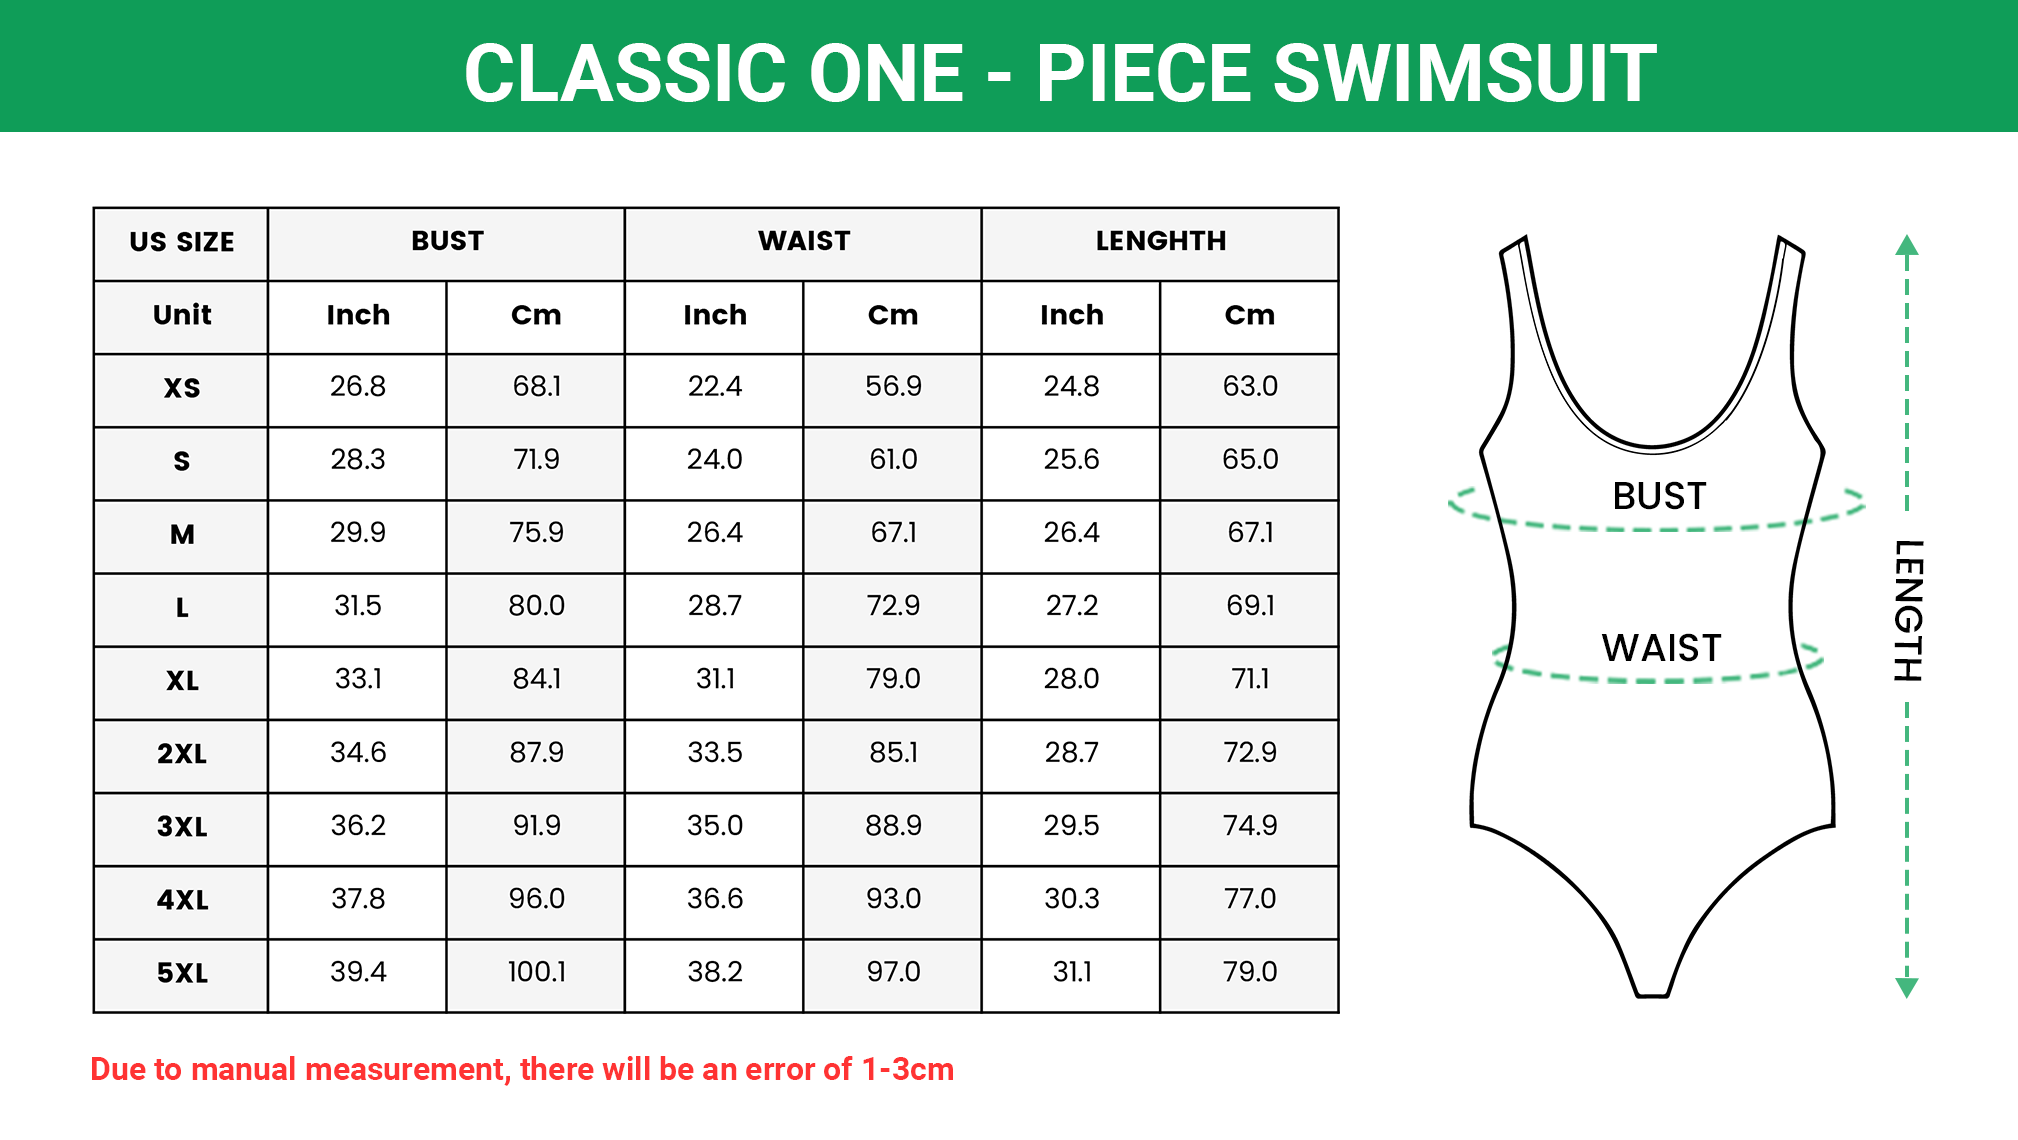 Youth Swimsuit Size Chart